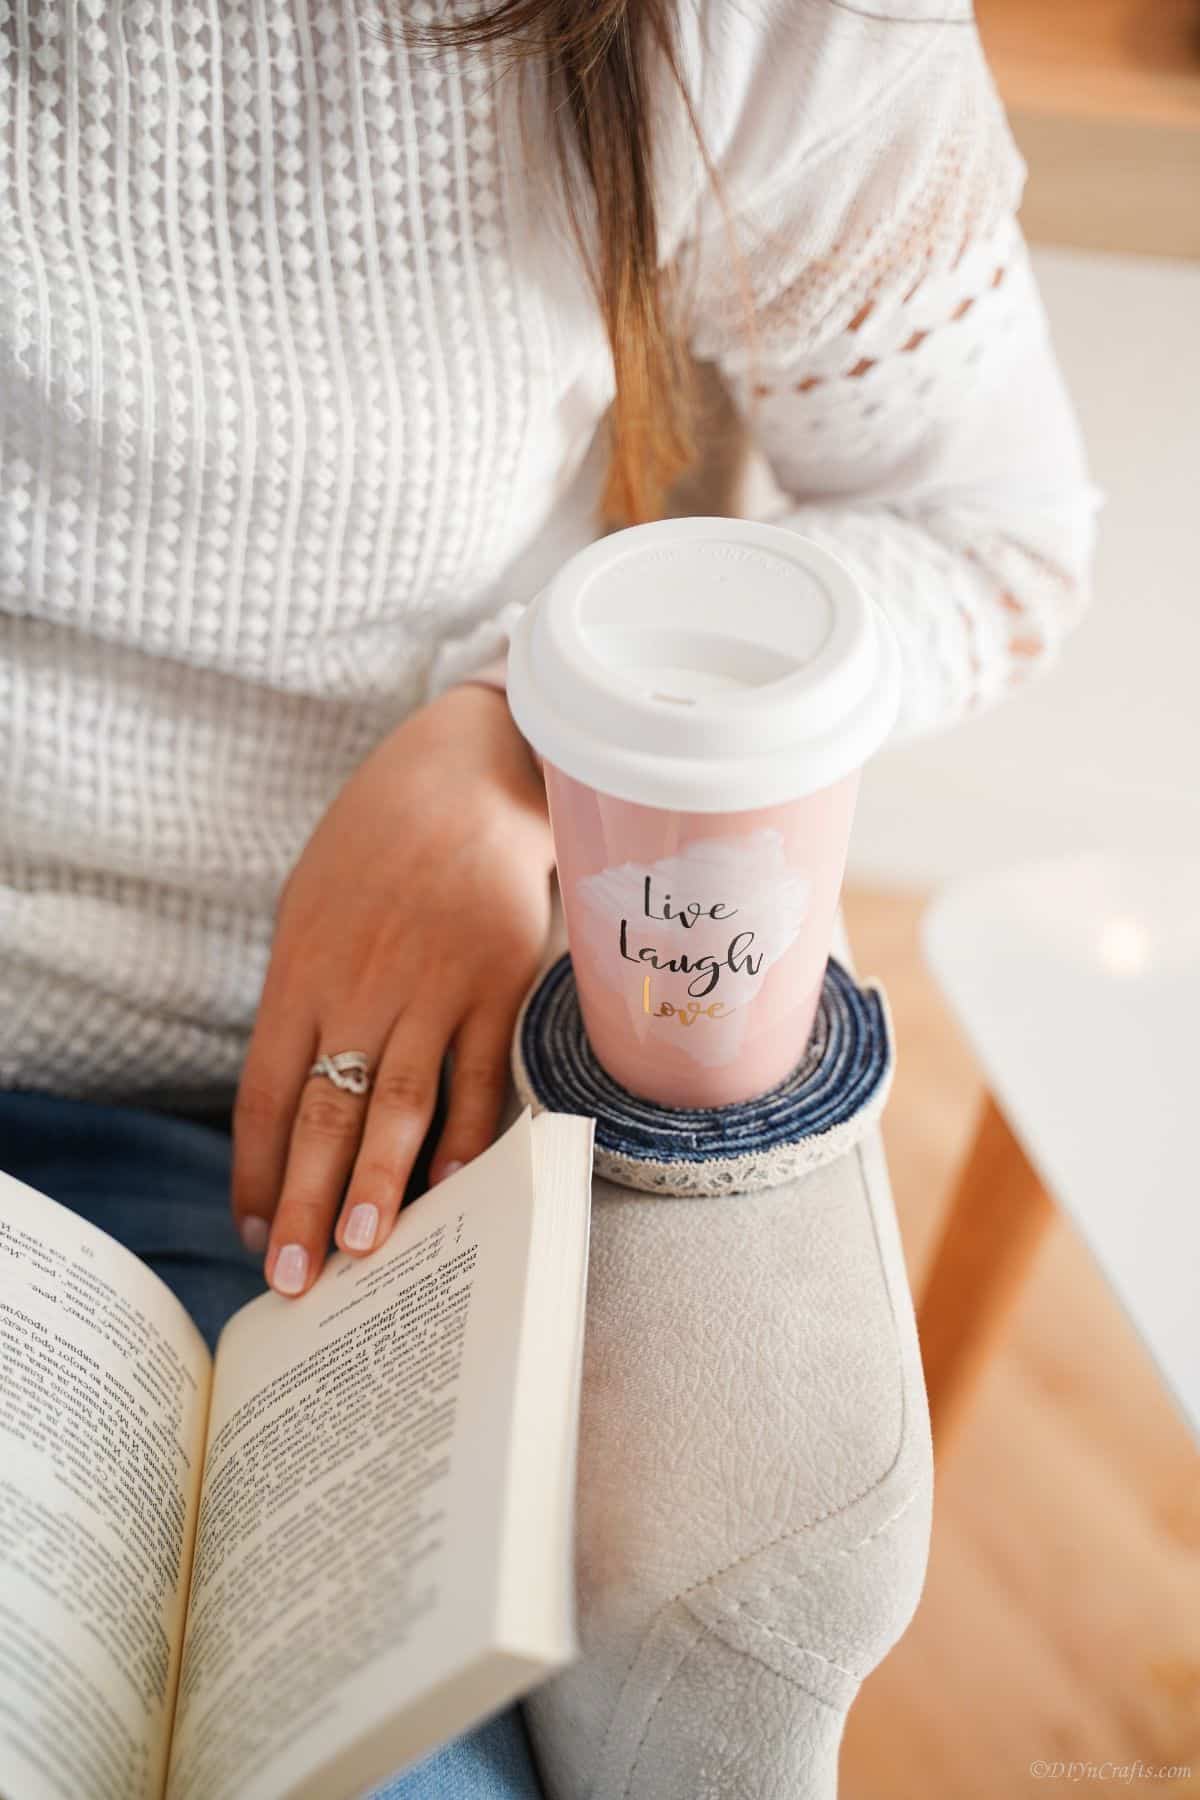 lady in white sweater in white chair with book in lap and coaster holding travel mug on arm of chair